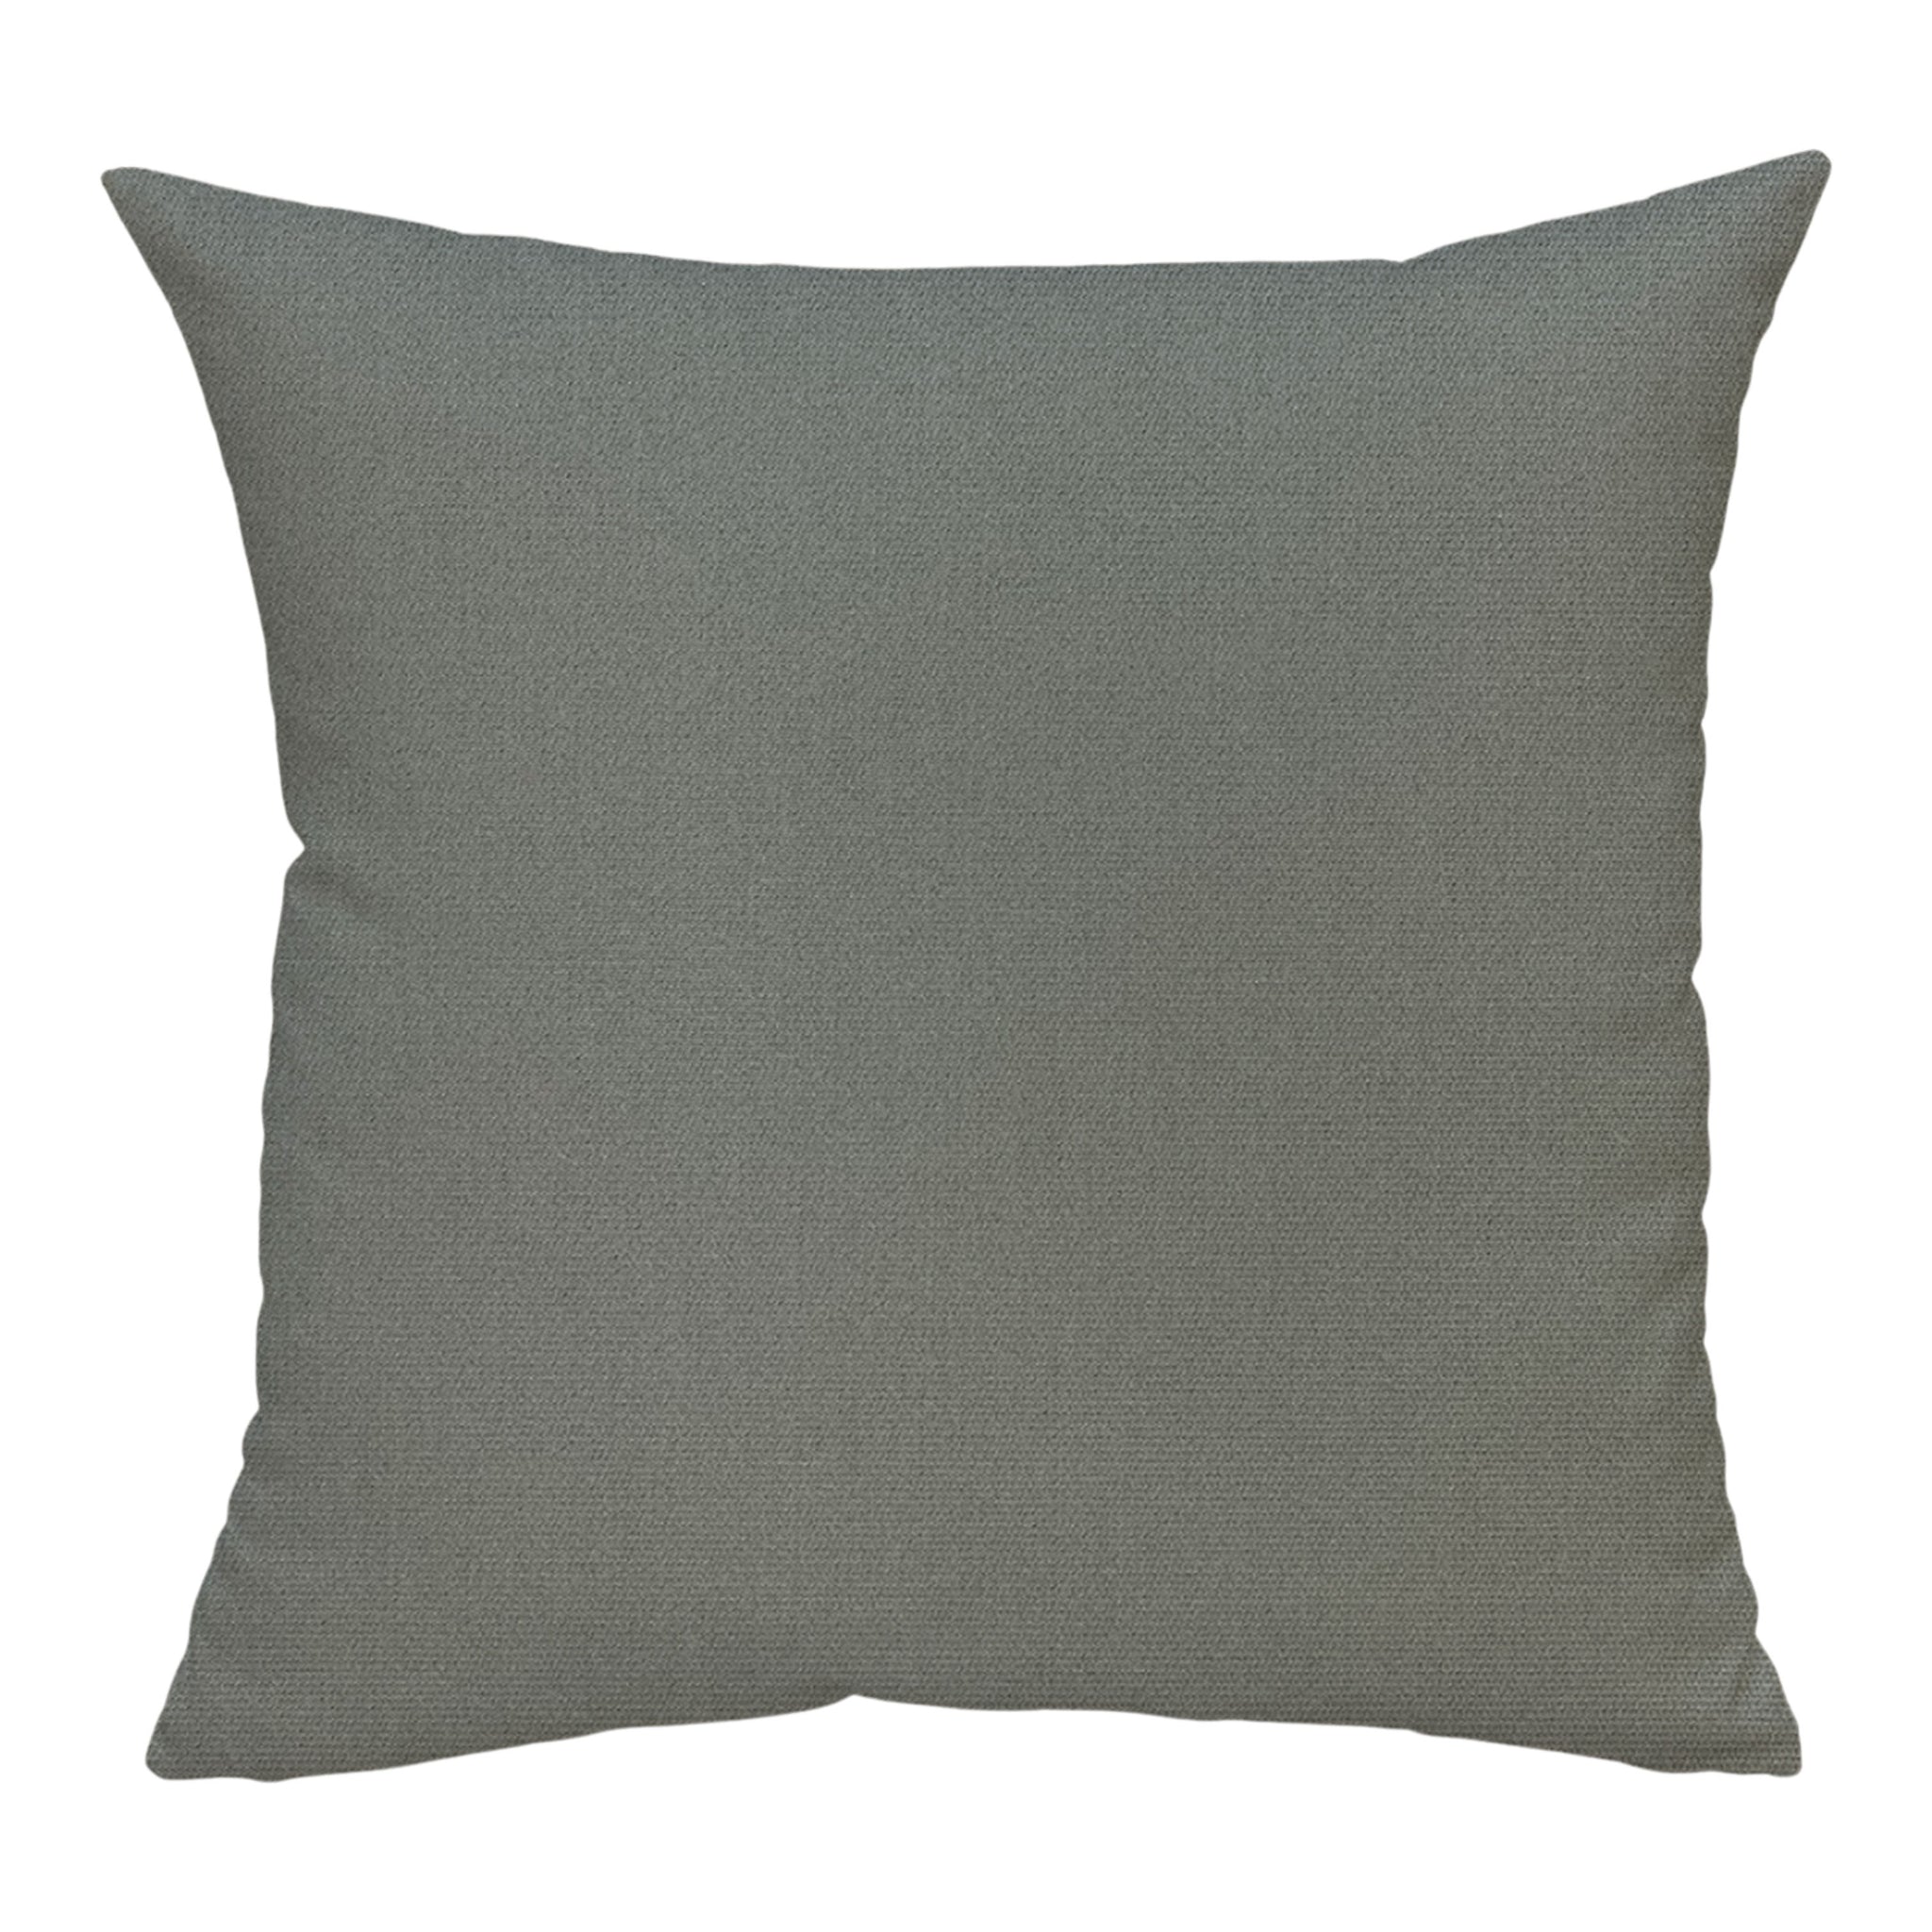 Sunbrella® Canvas Pillow Cover in Charcoal